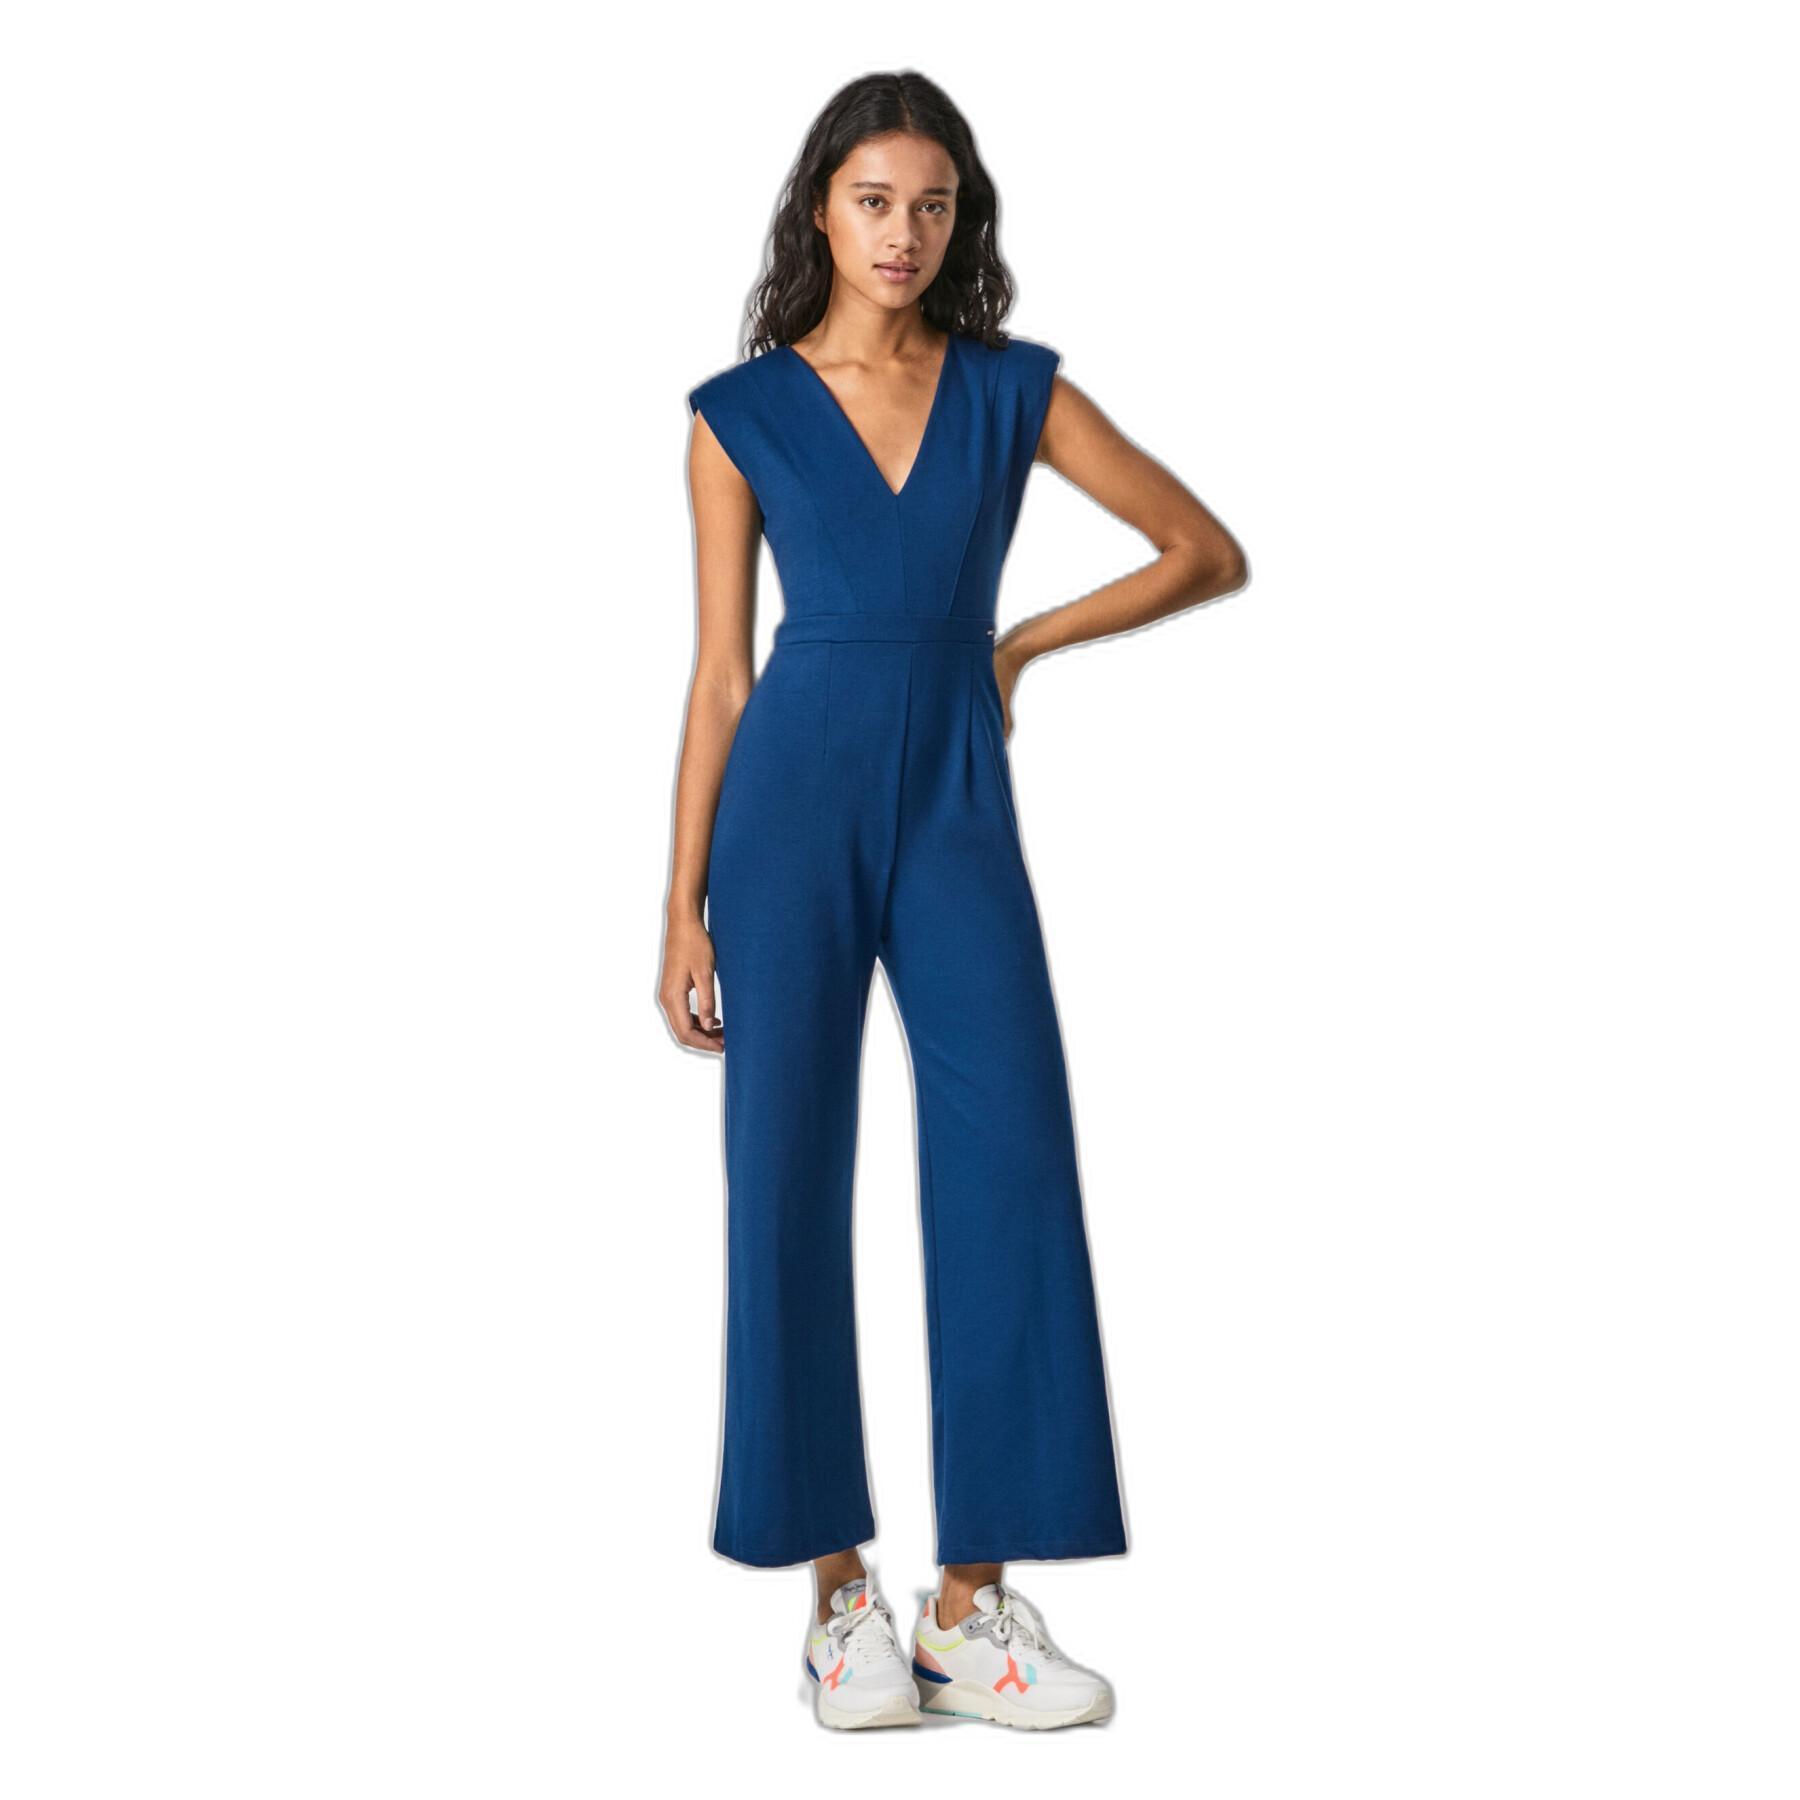 Women's jumpsuit Pepe Jeans Melody